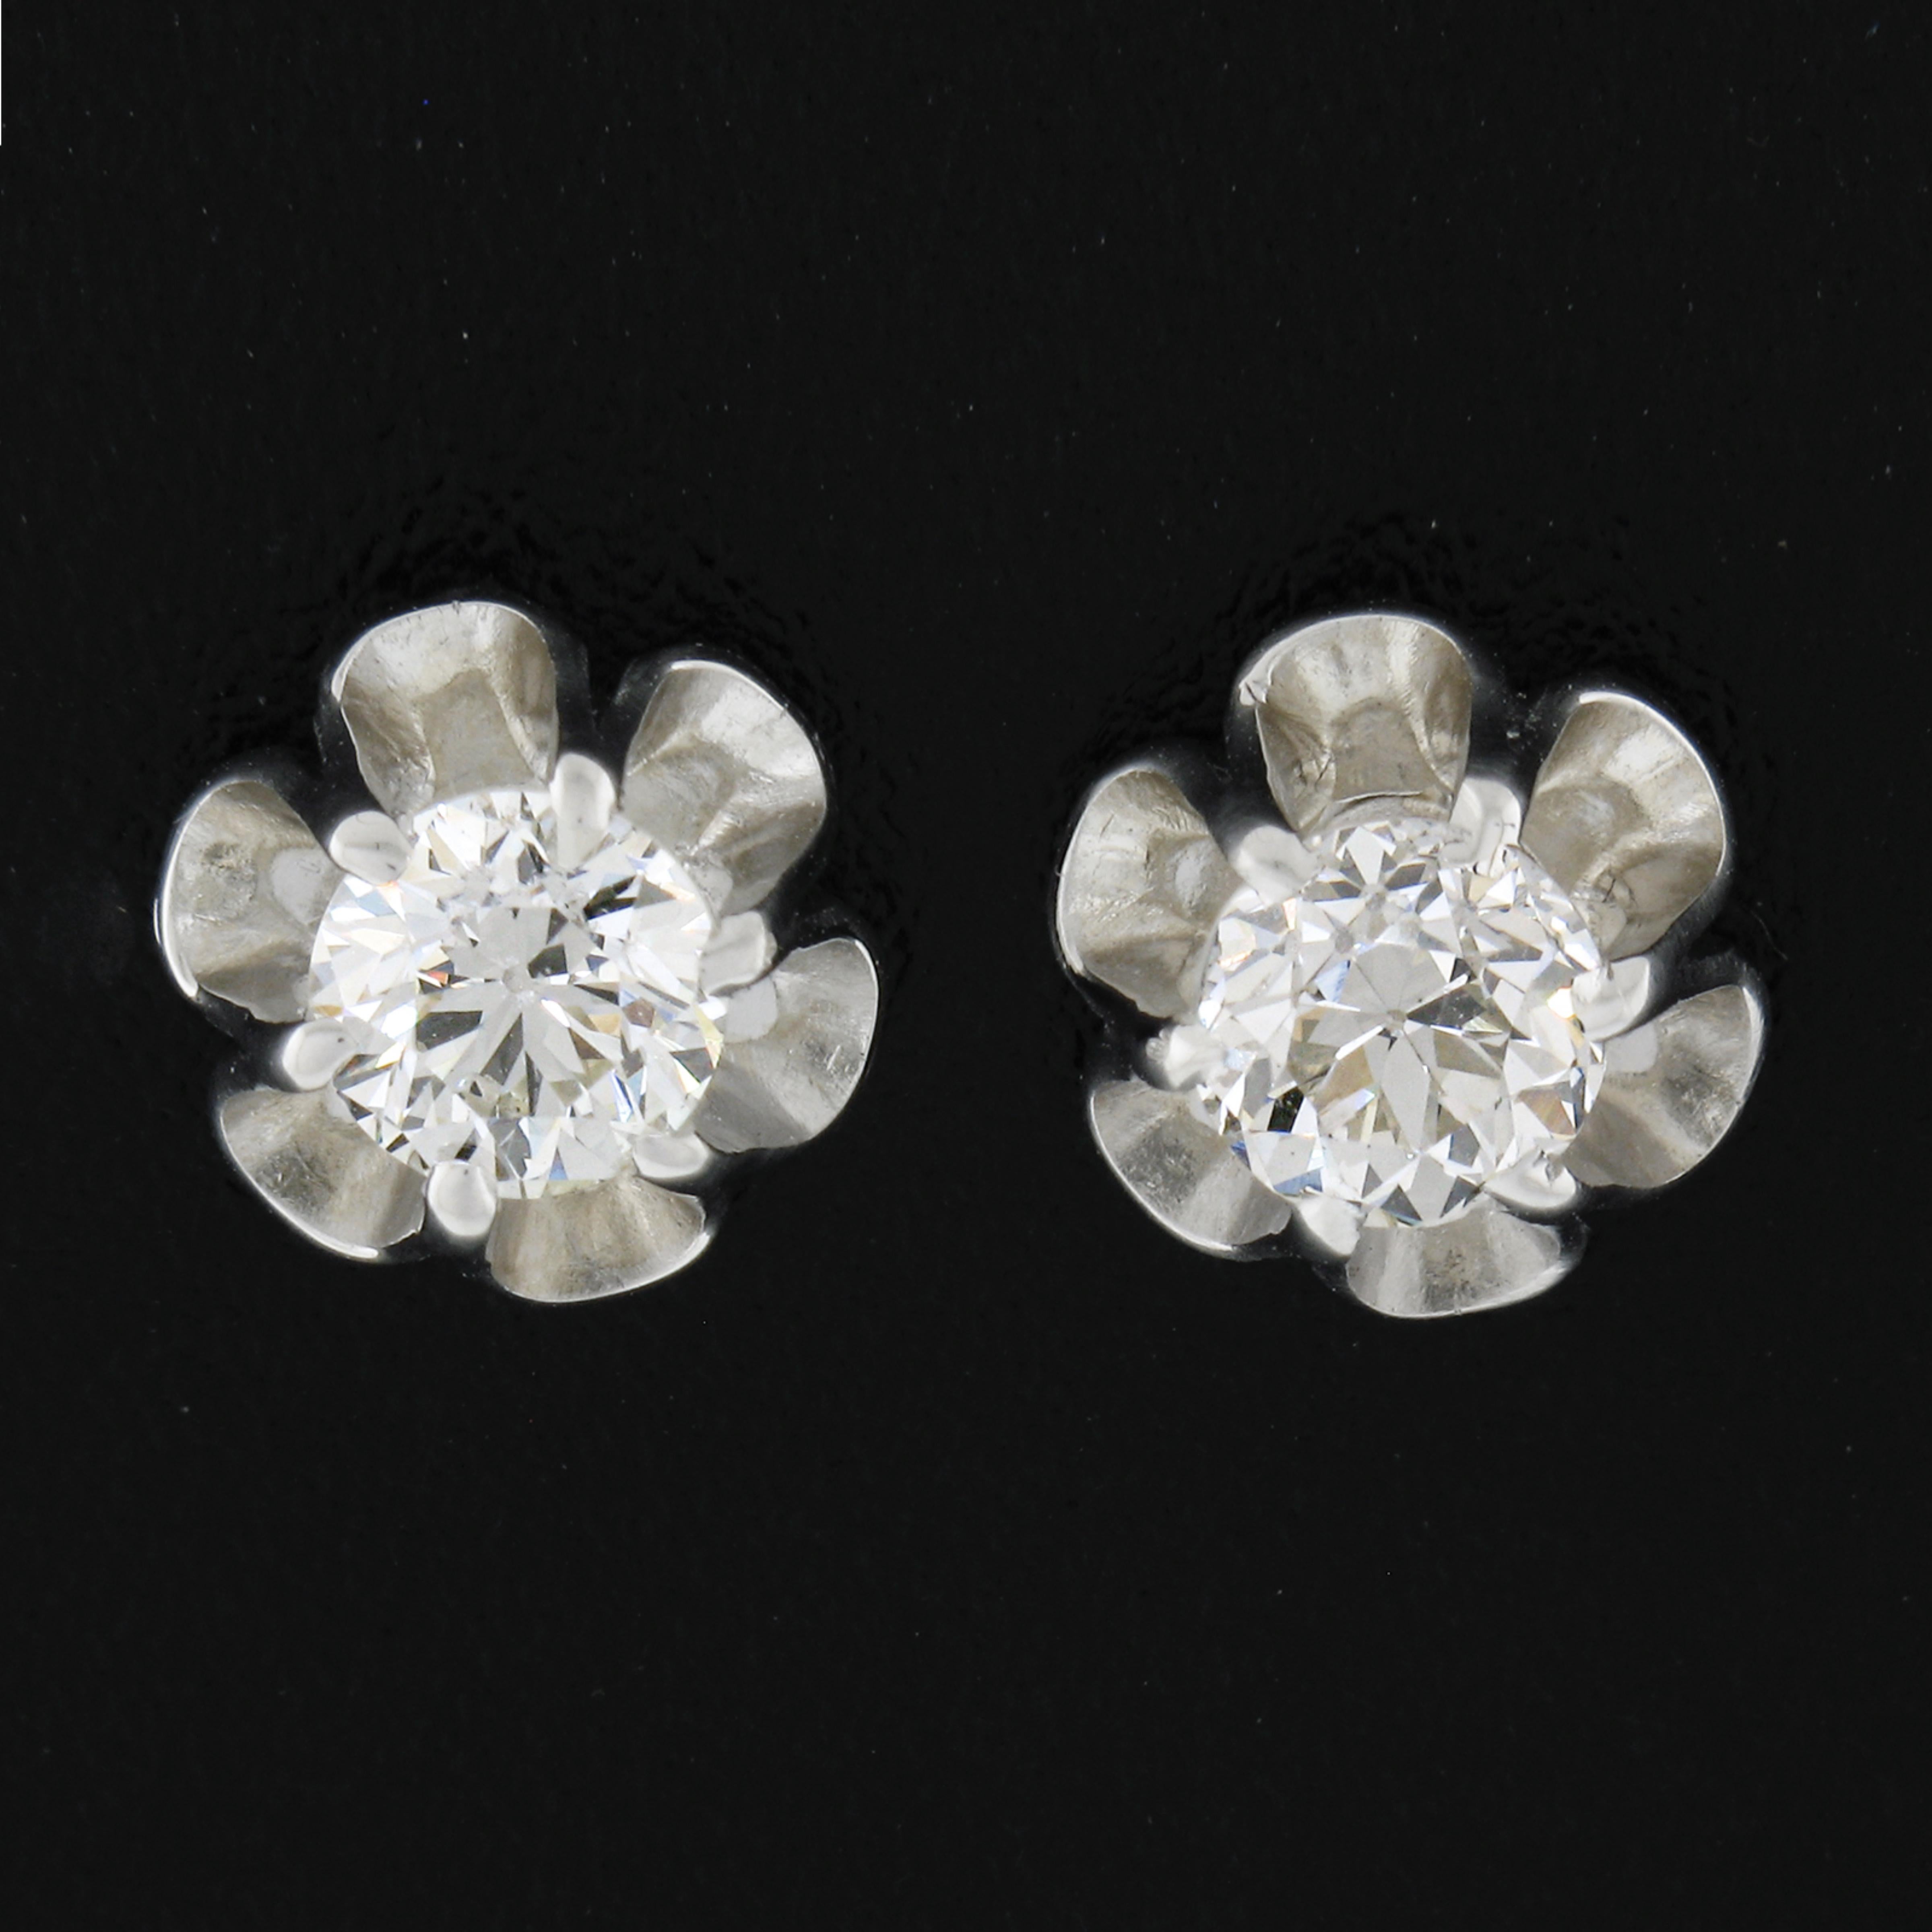 These gorgeous stud earrings are crafted in solid 14k white gold and feature old European cut diamonds that are elegantly set in brand new buttercup prong basket settings. The stunning and very fiery diamonds total 0.76 carats in weight and are